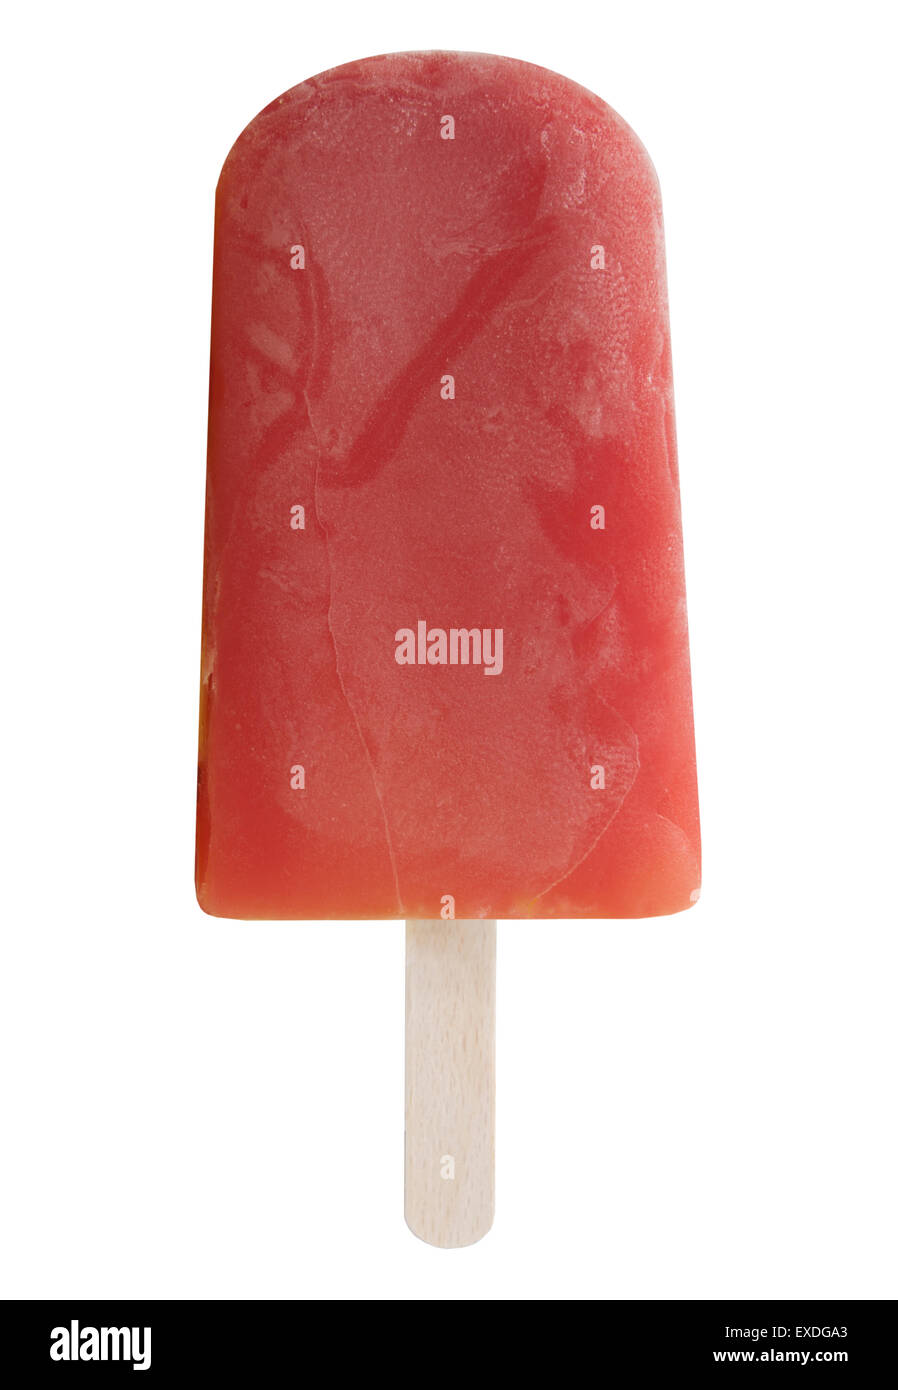 Red ice lolly pop over a white background Stock Photo